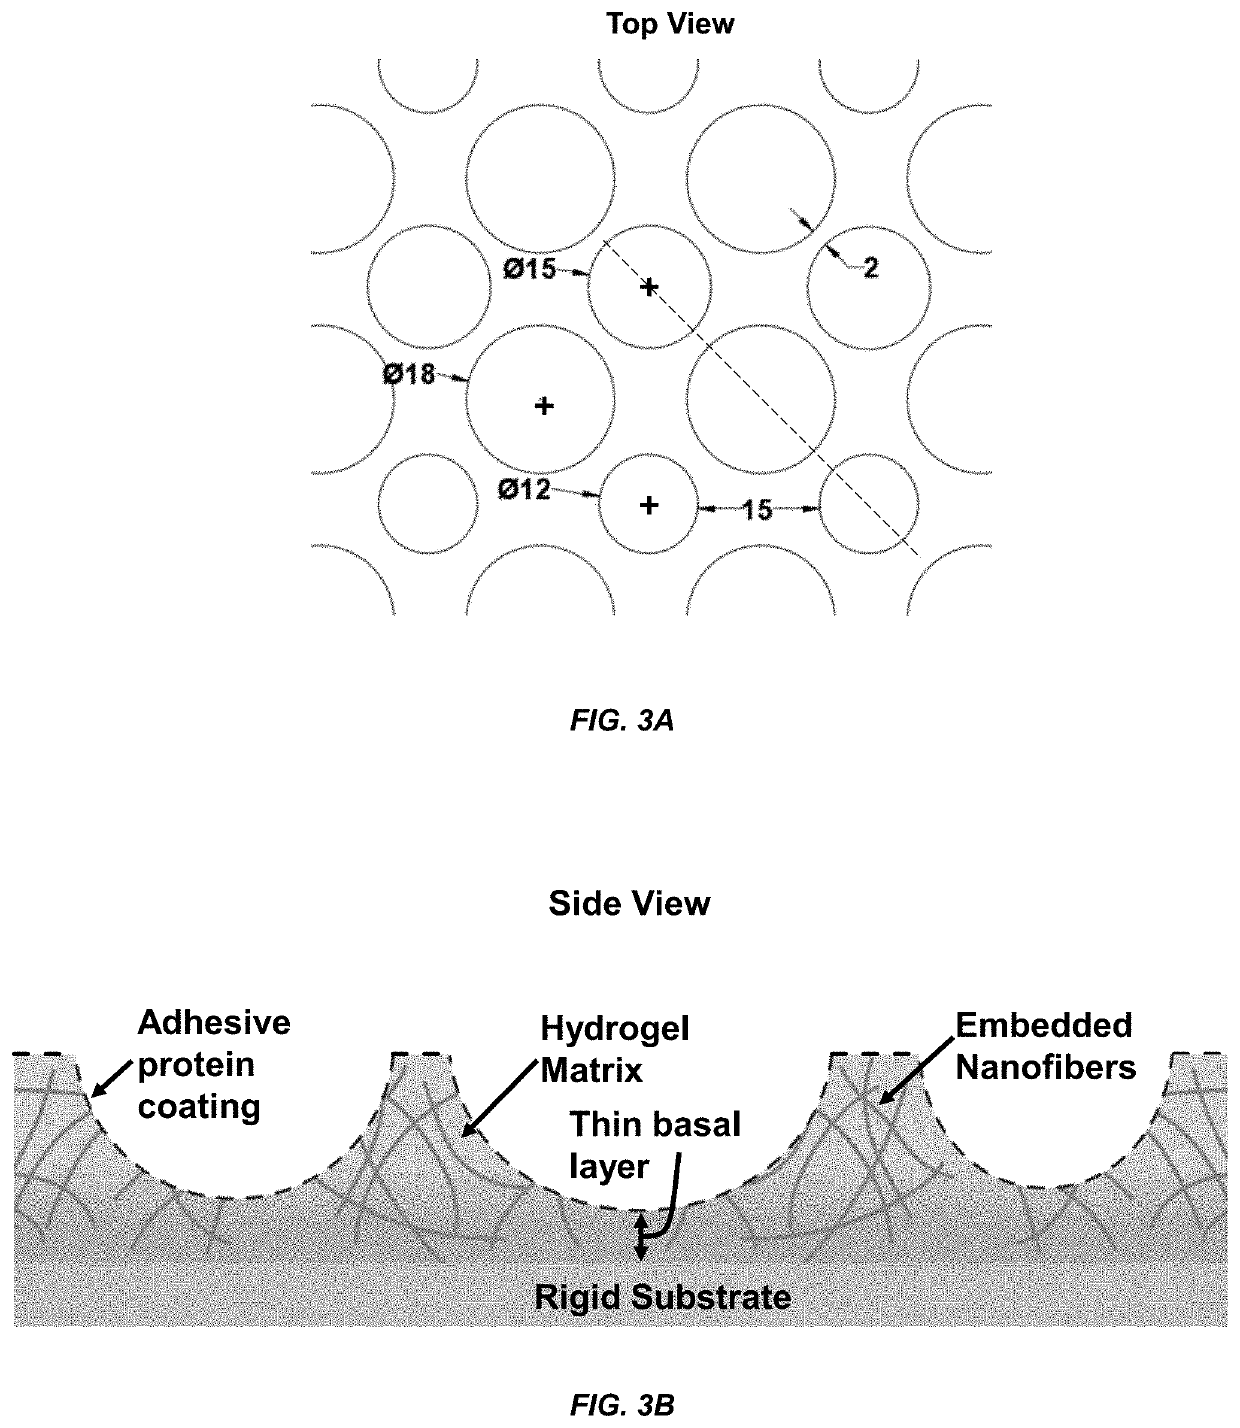 Micropatterned hydrogel for cell cultures